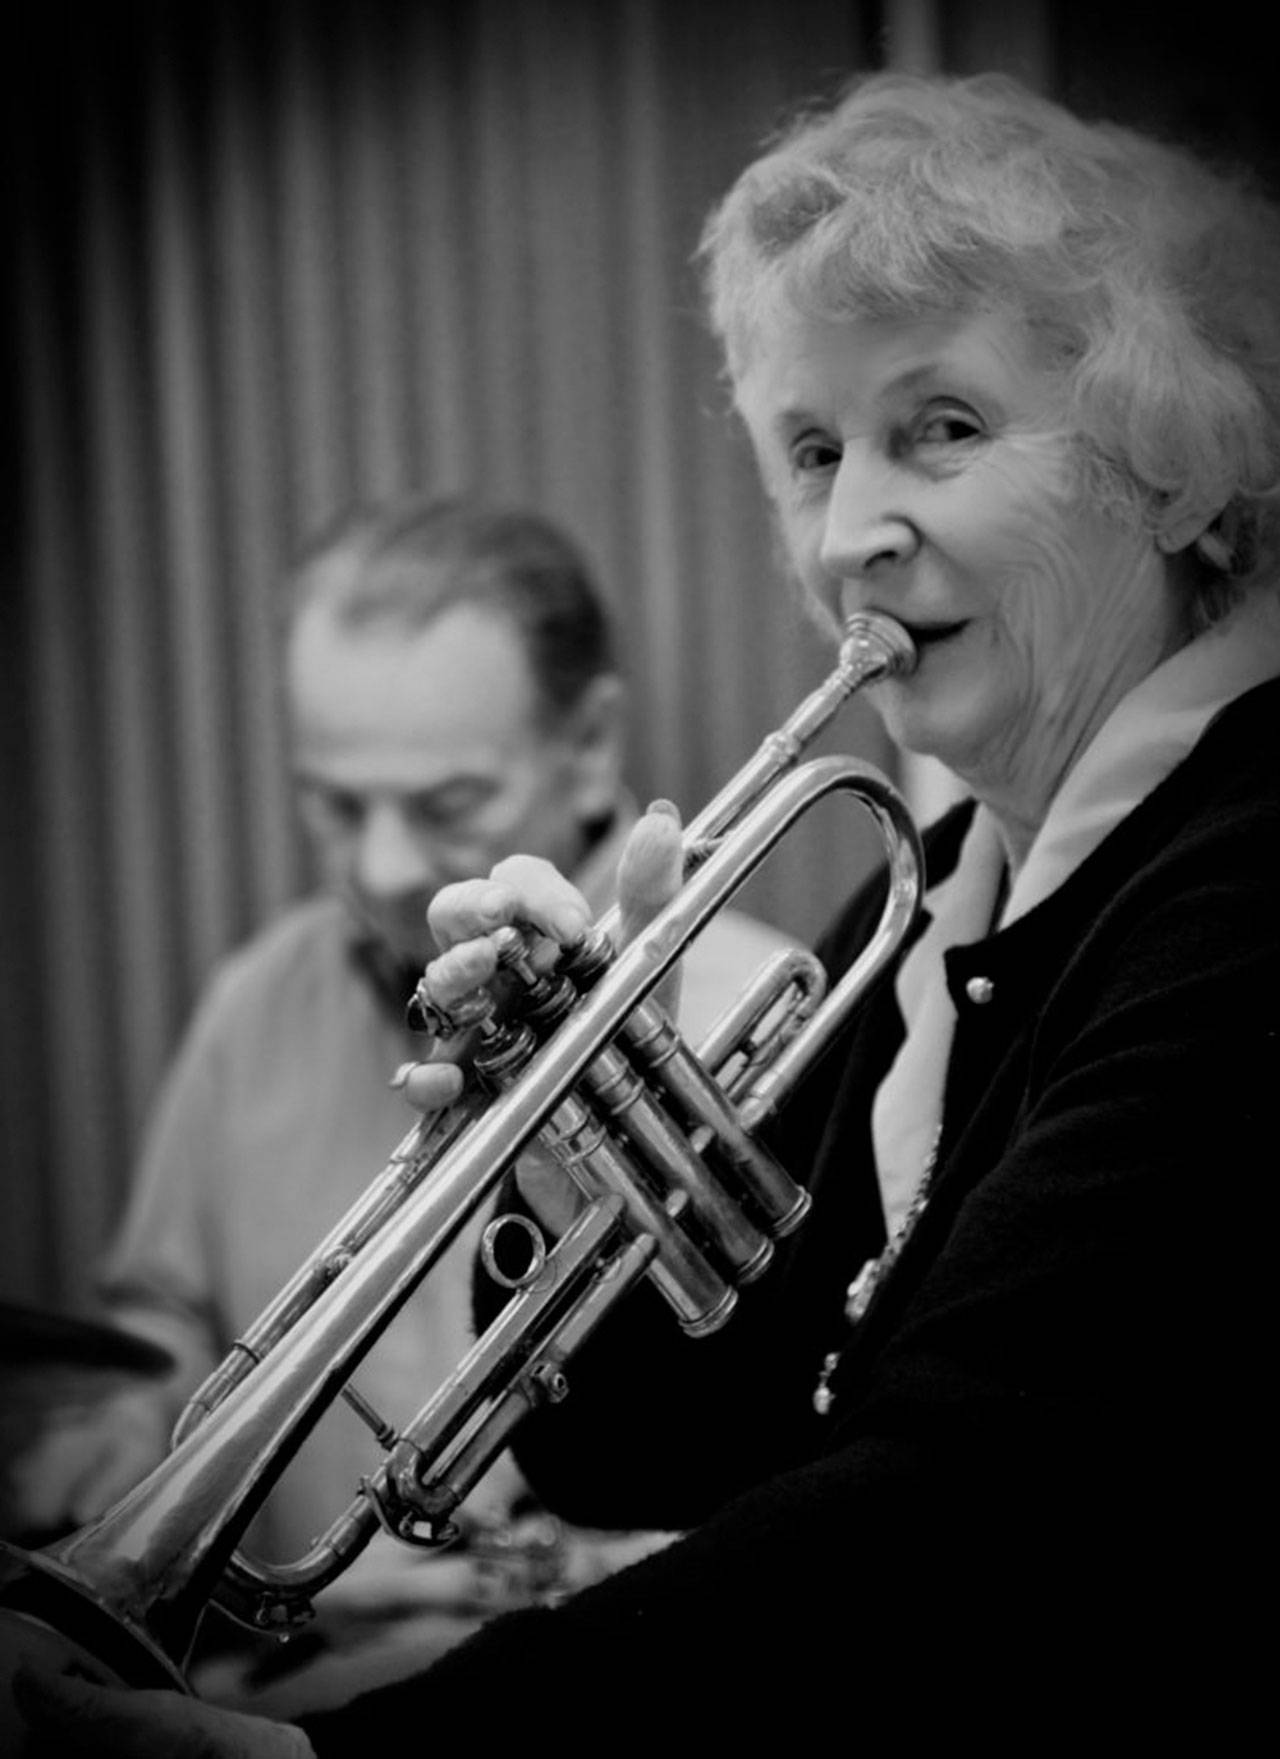 Image courtesy of the Treehouse Café | Renowned trumpeter Yvonne McAllister will perform a special free concert at the Treehouse Café in Lynwood at 7 p.m. Sunday, July 15.